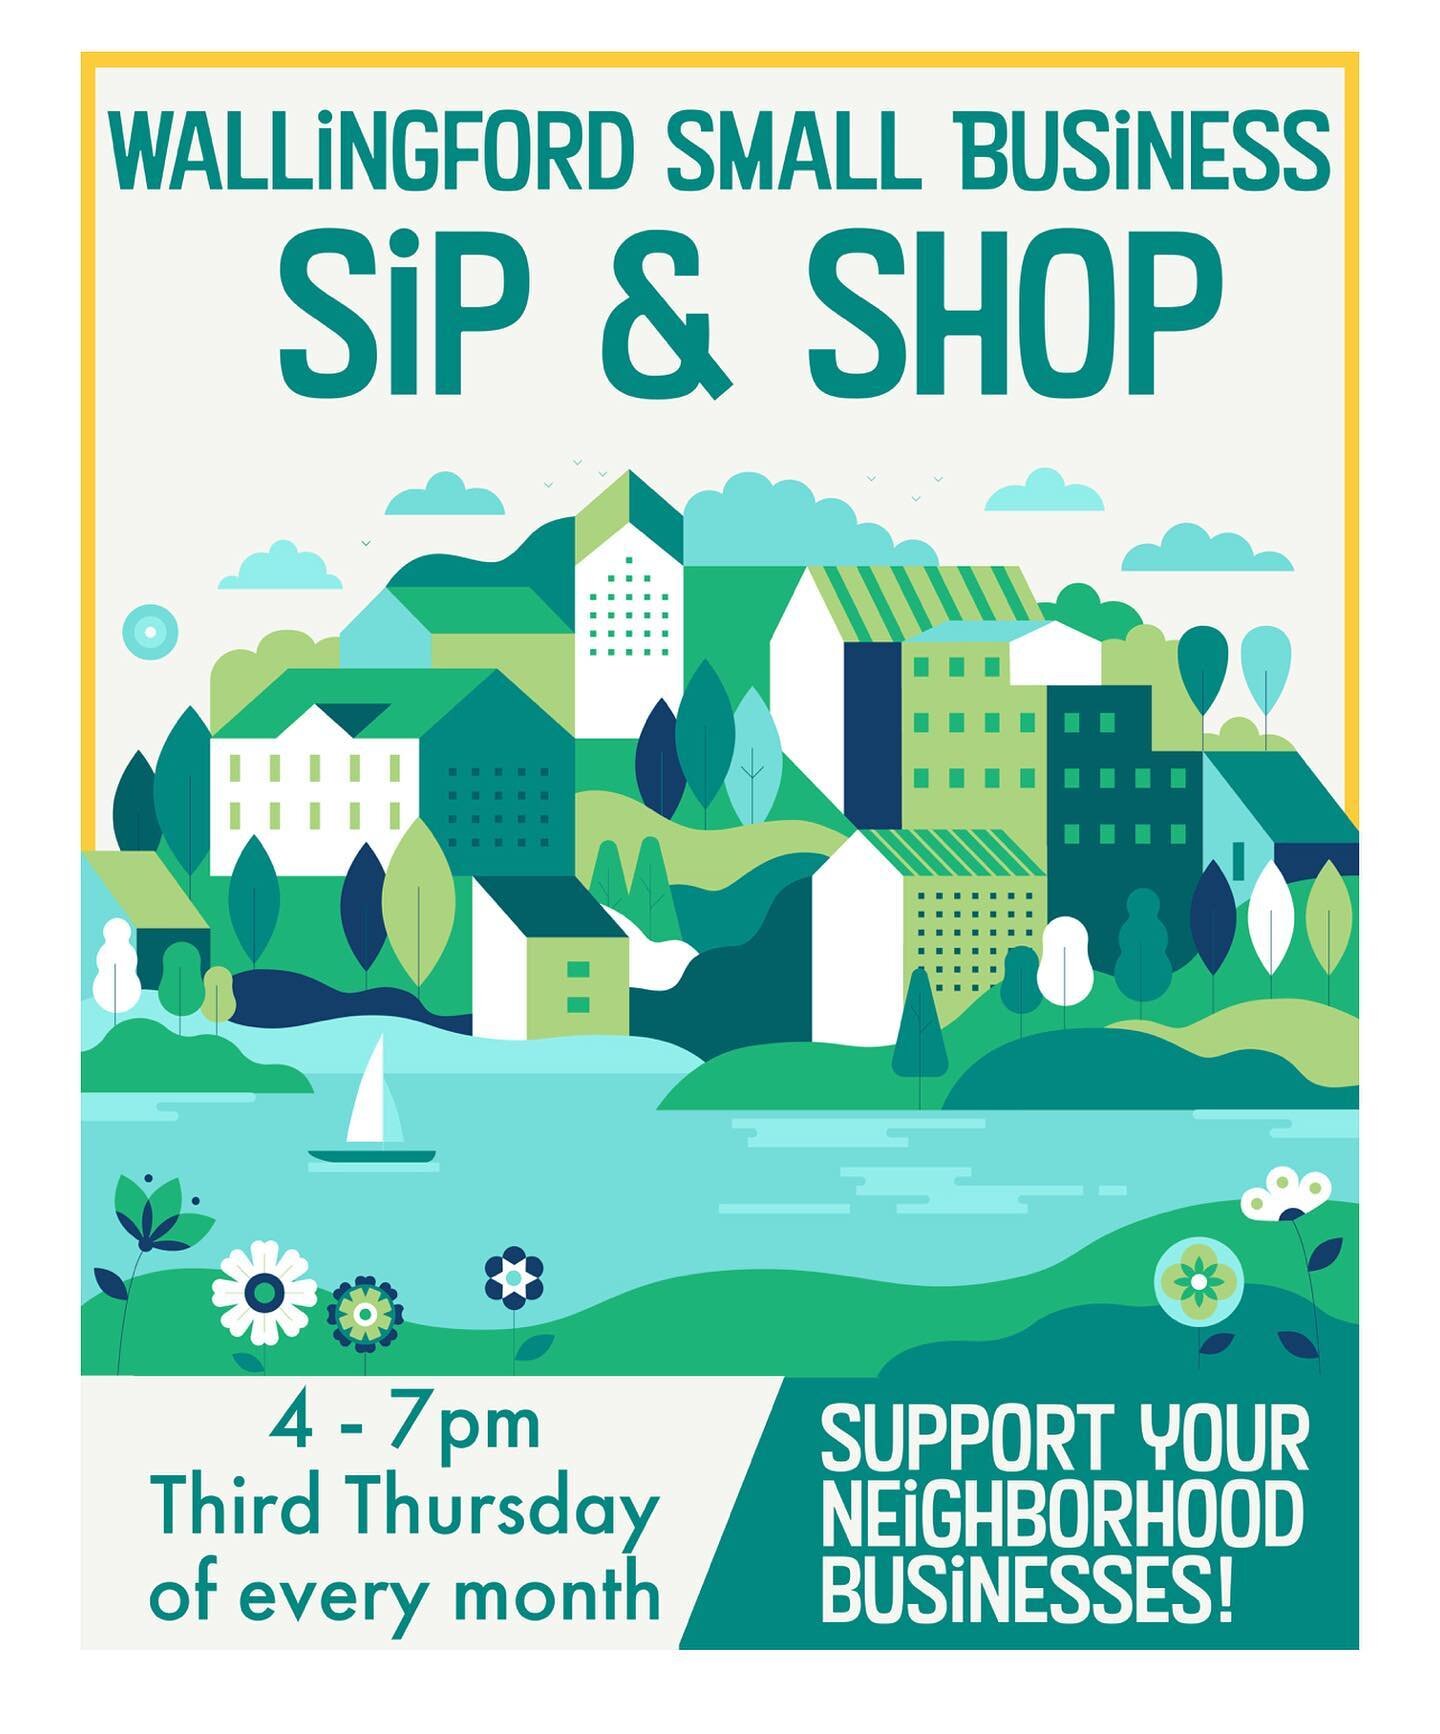 stop by tonight for Wallingford&lsquo;s third Thursday a.k.a. sippin shop. Will be open till seven! Come say hi!!!